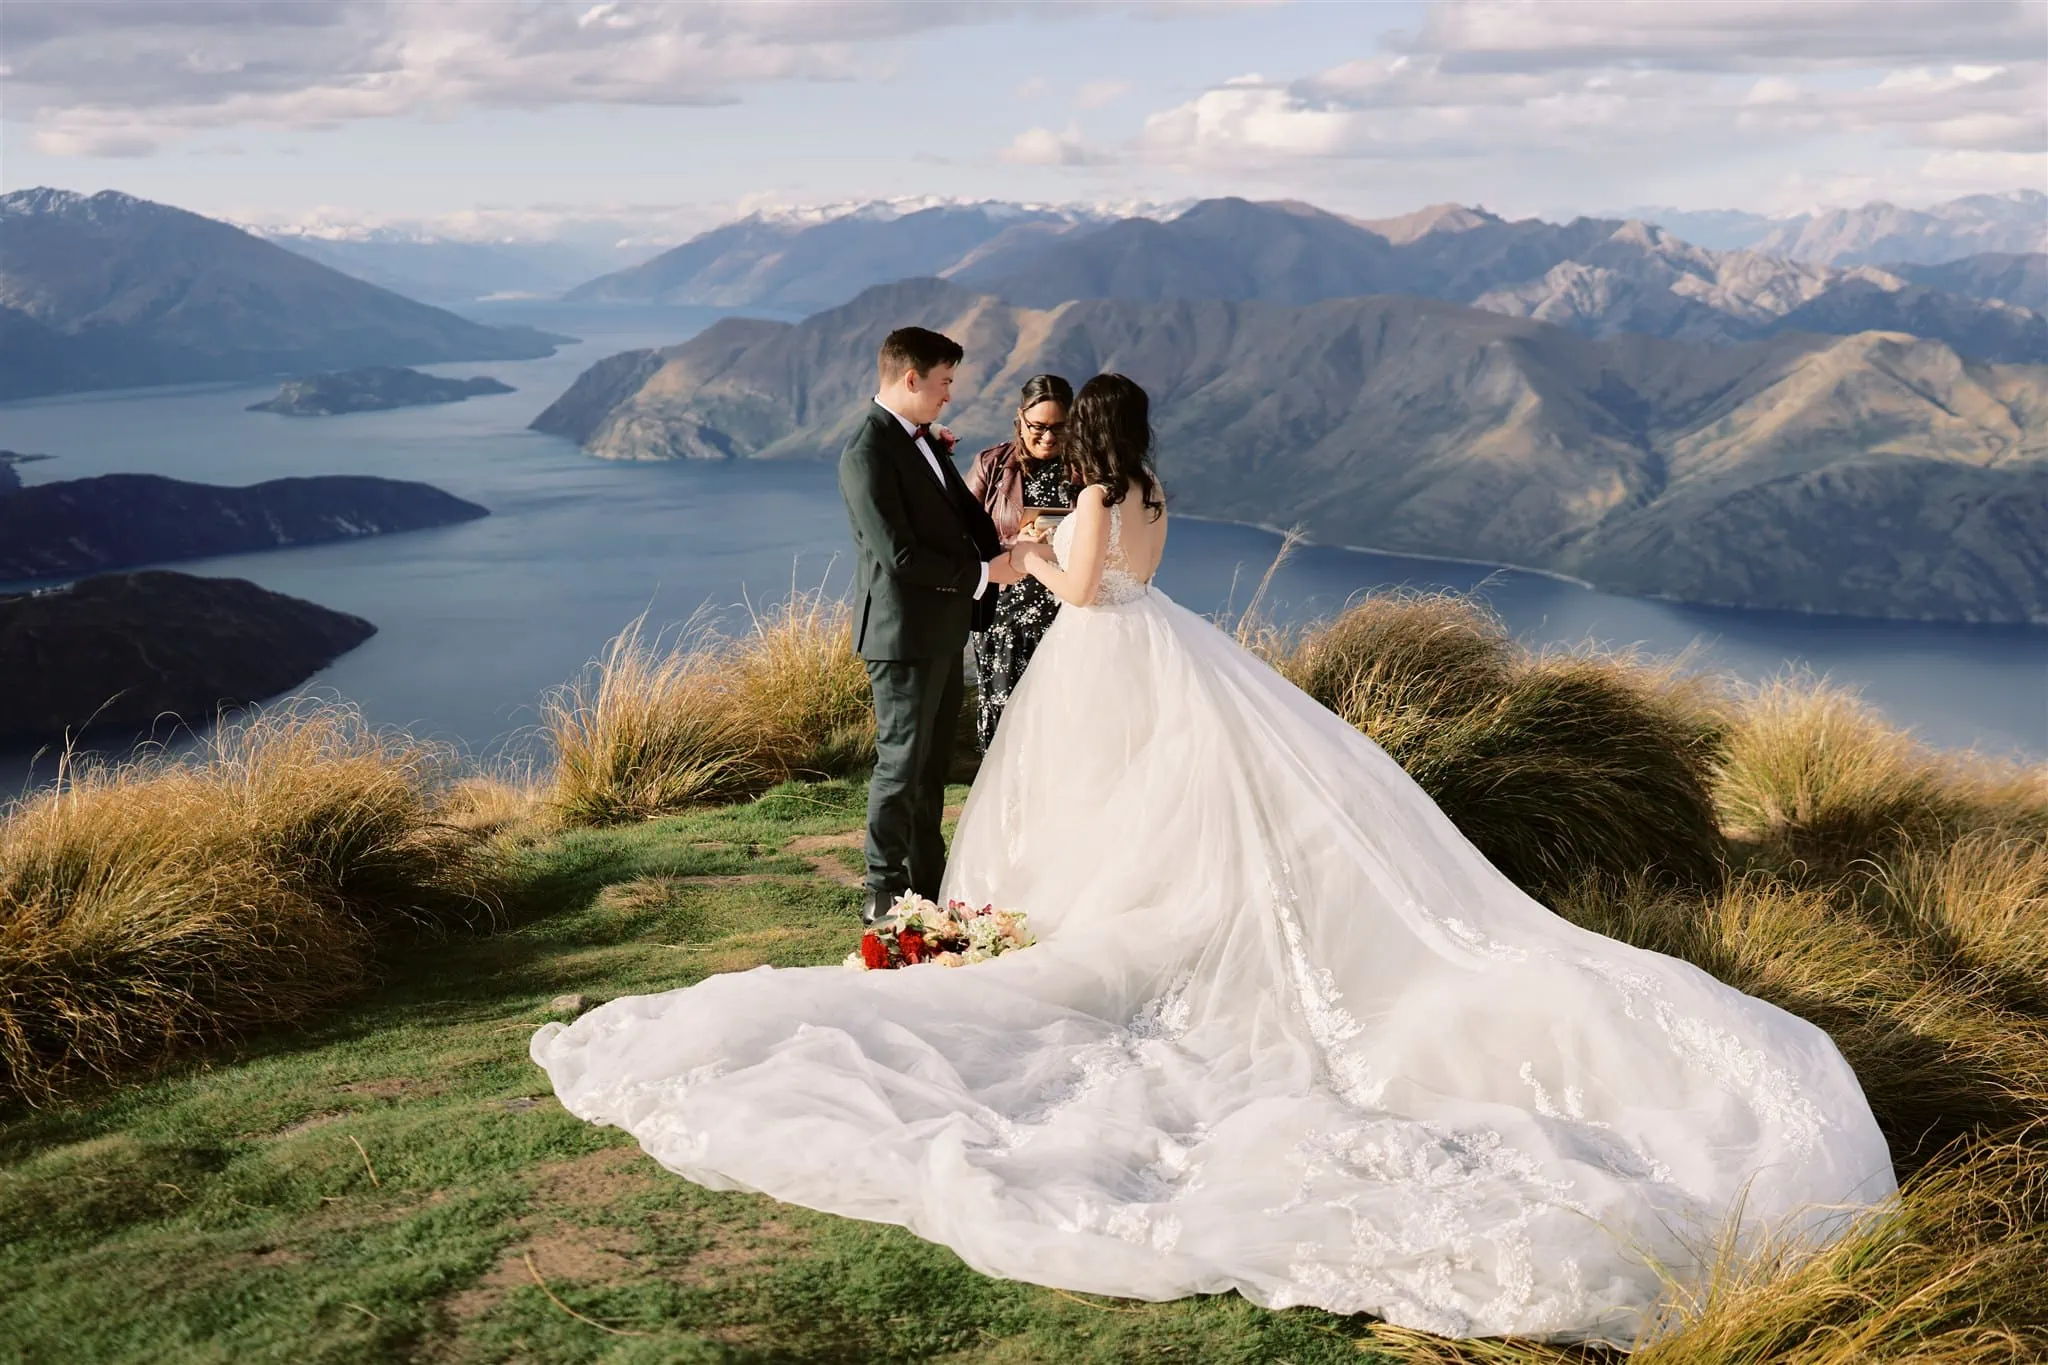 Queenstown Elopement Heli Wedding Photographer クイーンズタウン結婚式 | An elopement wedding with a bride and groom standing on top of a mountain overlooking Lake Wanaka.